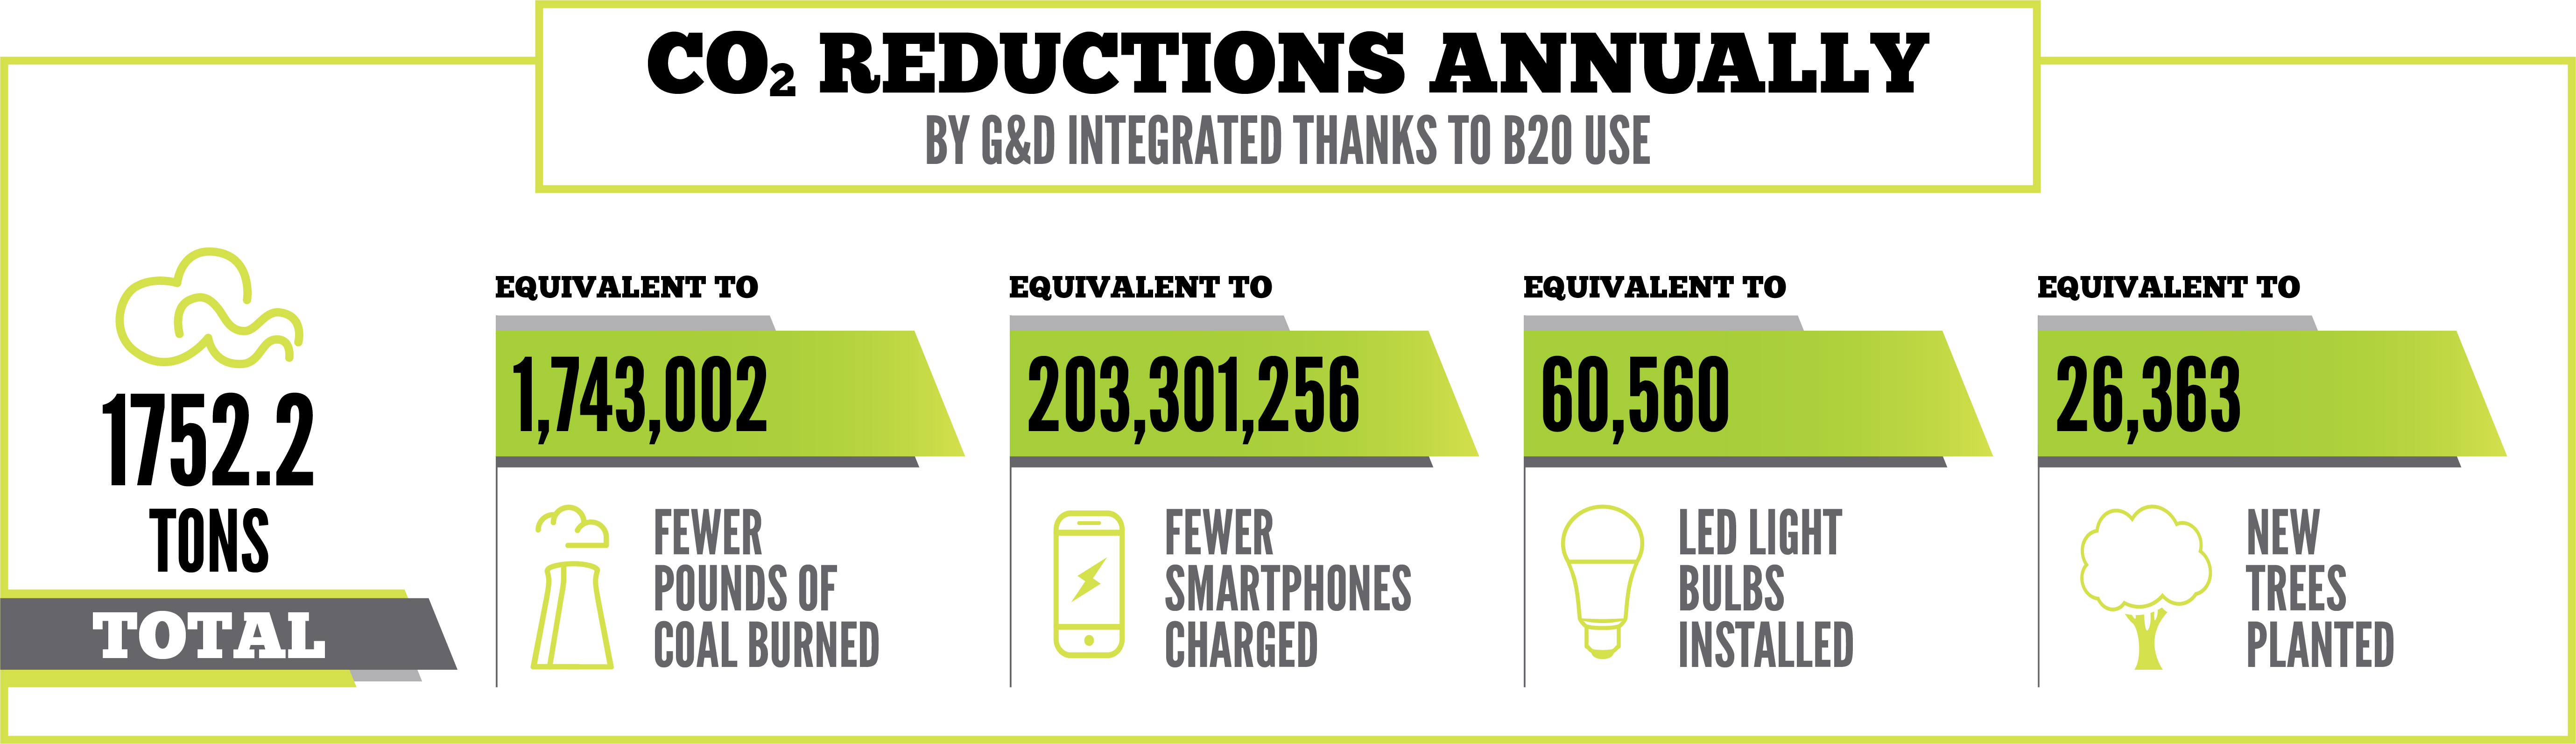 CO2 Reductions Annually ISA B20 Club